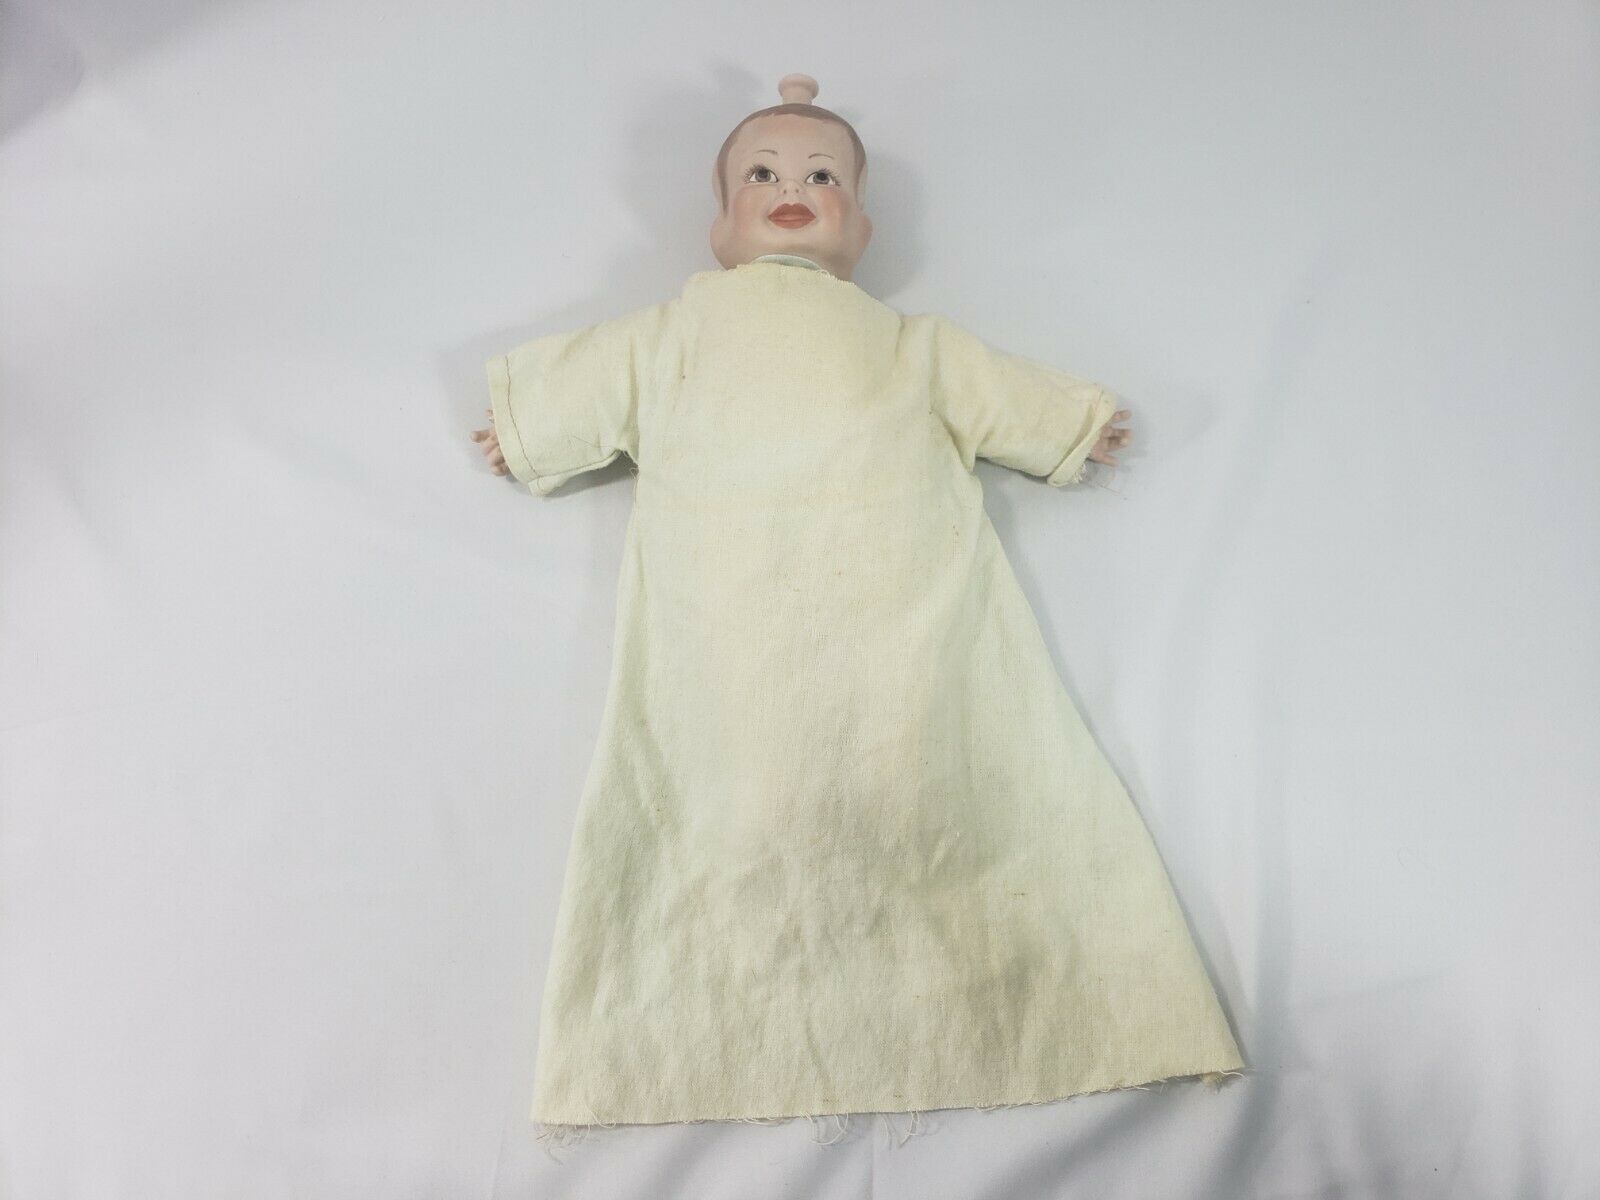 Tri Faced Ceramic Doll Twist Head - Creepy Rotating Baby Porcelain Crying, Scary